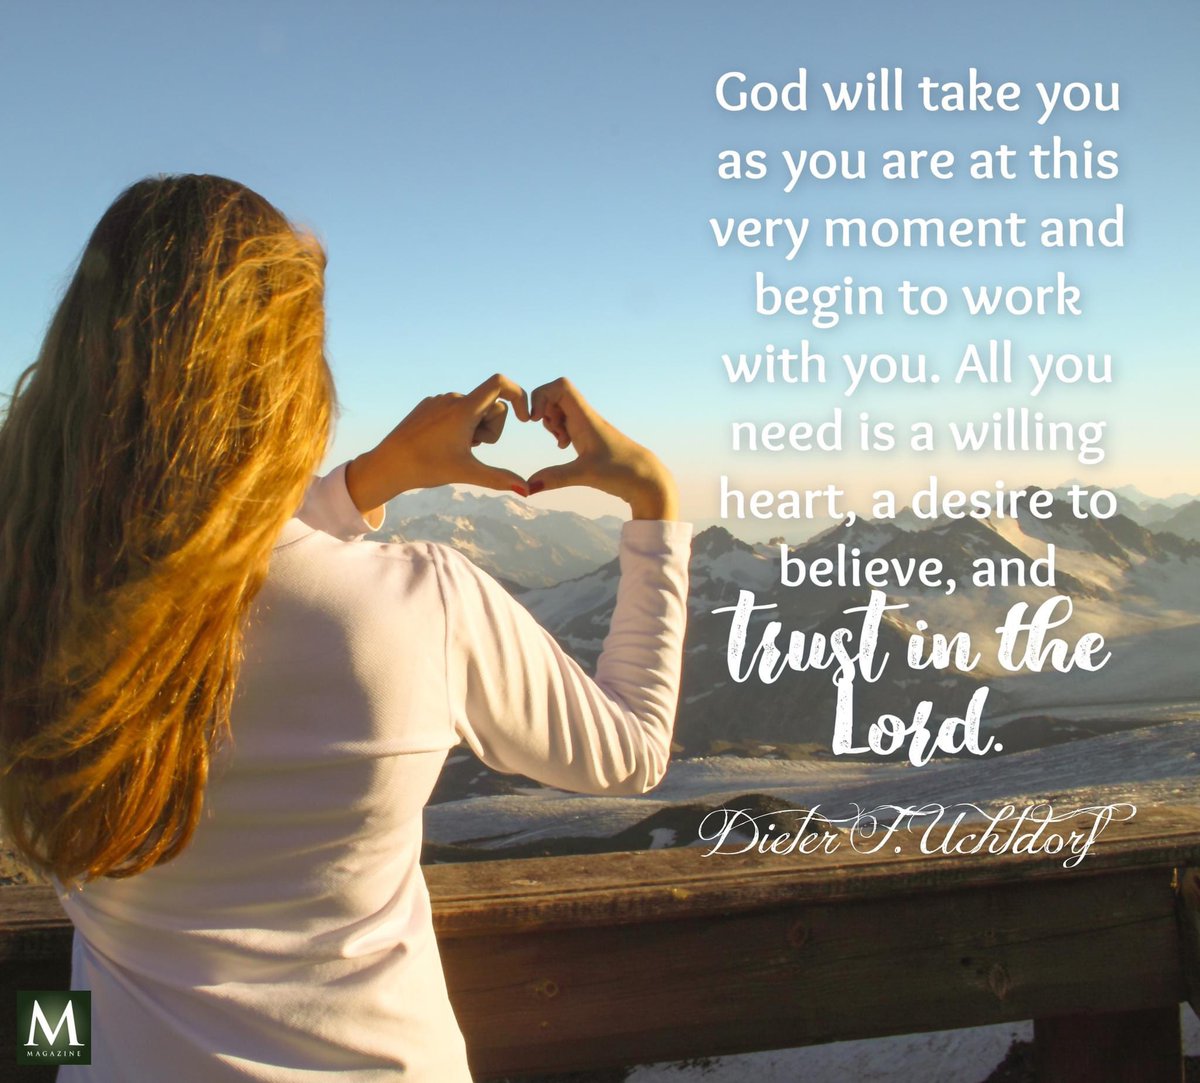 'God will take you as you are at this very moment and begin to work with you.  All you need is a willing heart, a desire to believe, and trust in the Lord.' ~ Elder Dieter F. Uchtdorf 

#TrustGod #GodLovesYou #HisDay #CountOnHim #EmbraceHim #ChildOfGod #ShareGoodness #LDSChurch